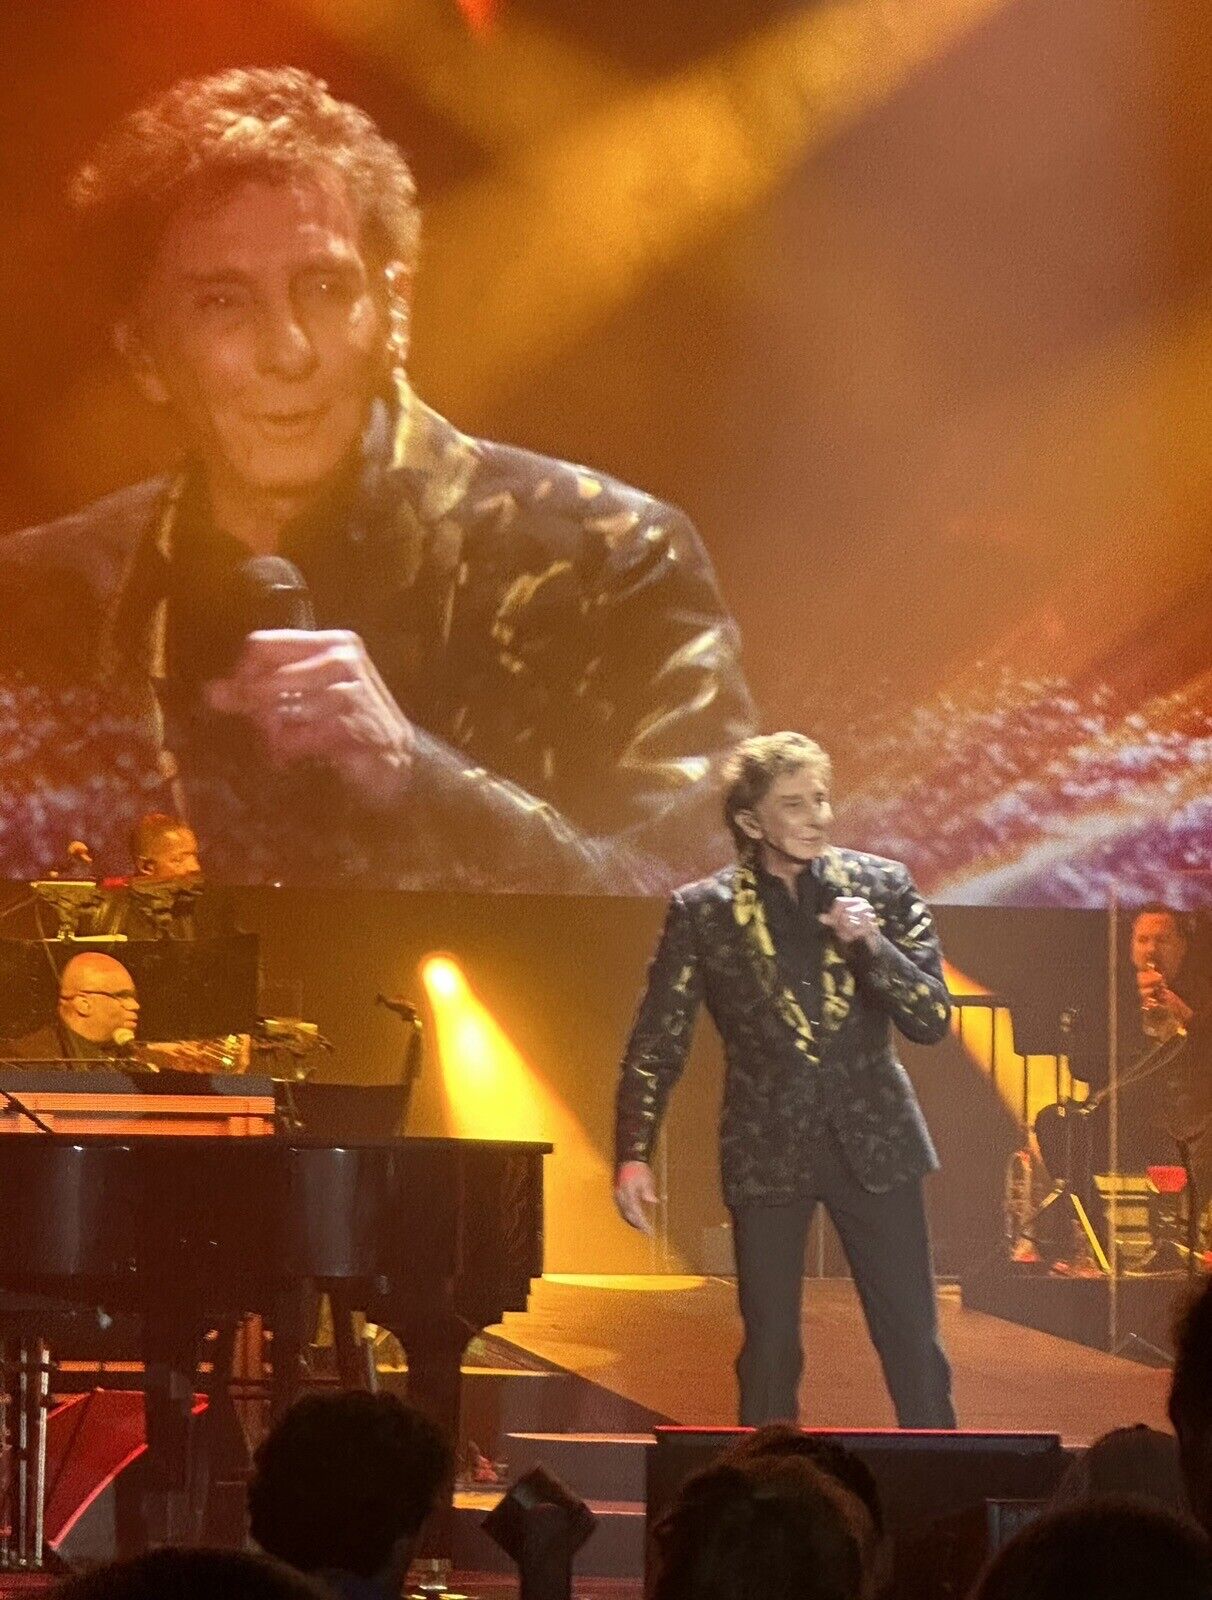 Barry Manilow - 2 Tickets April 17th New York City Orchestra Aisle Radio City